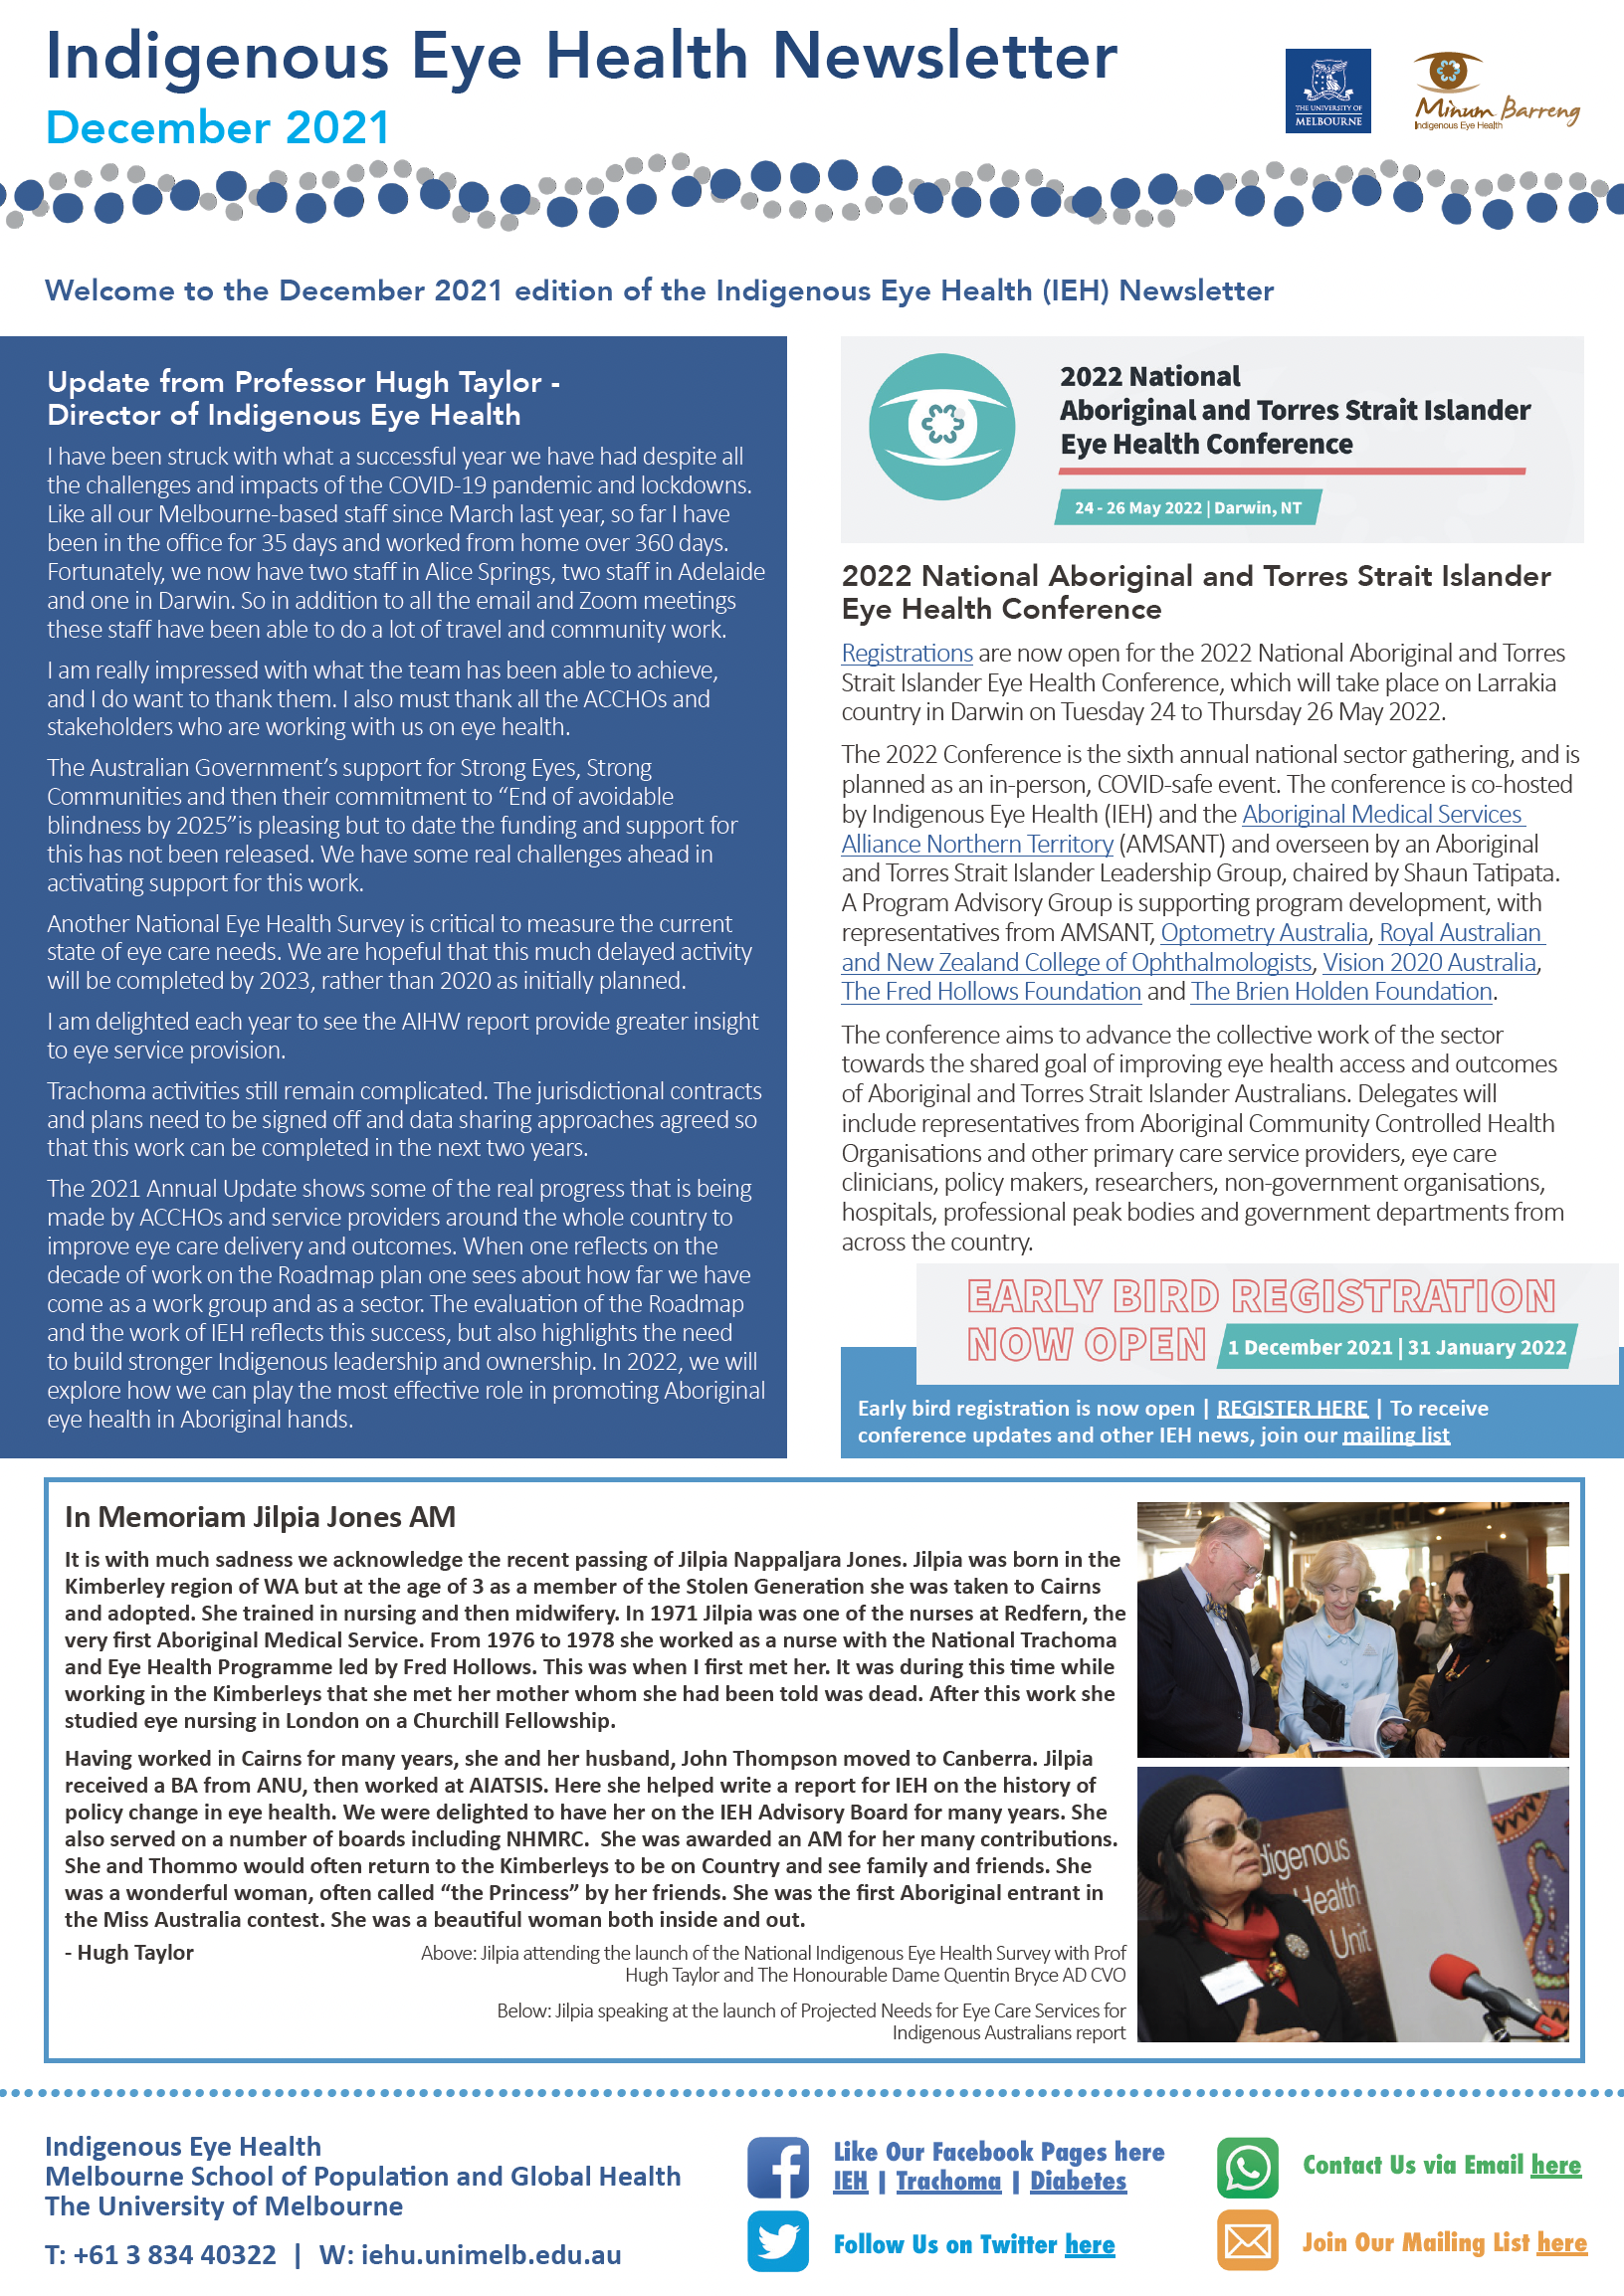 2021 IEH Newsletter front page